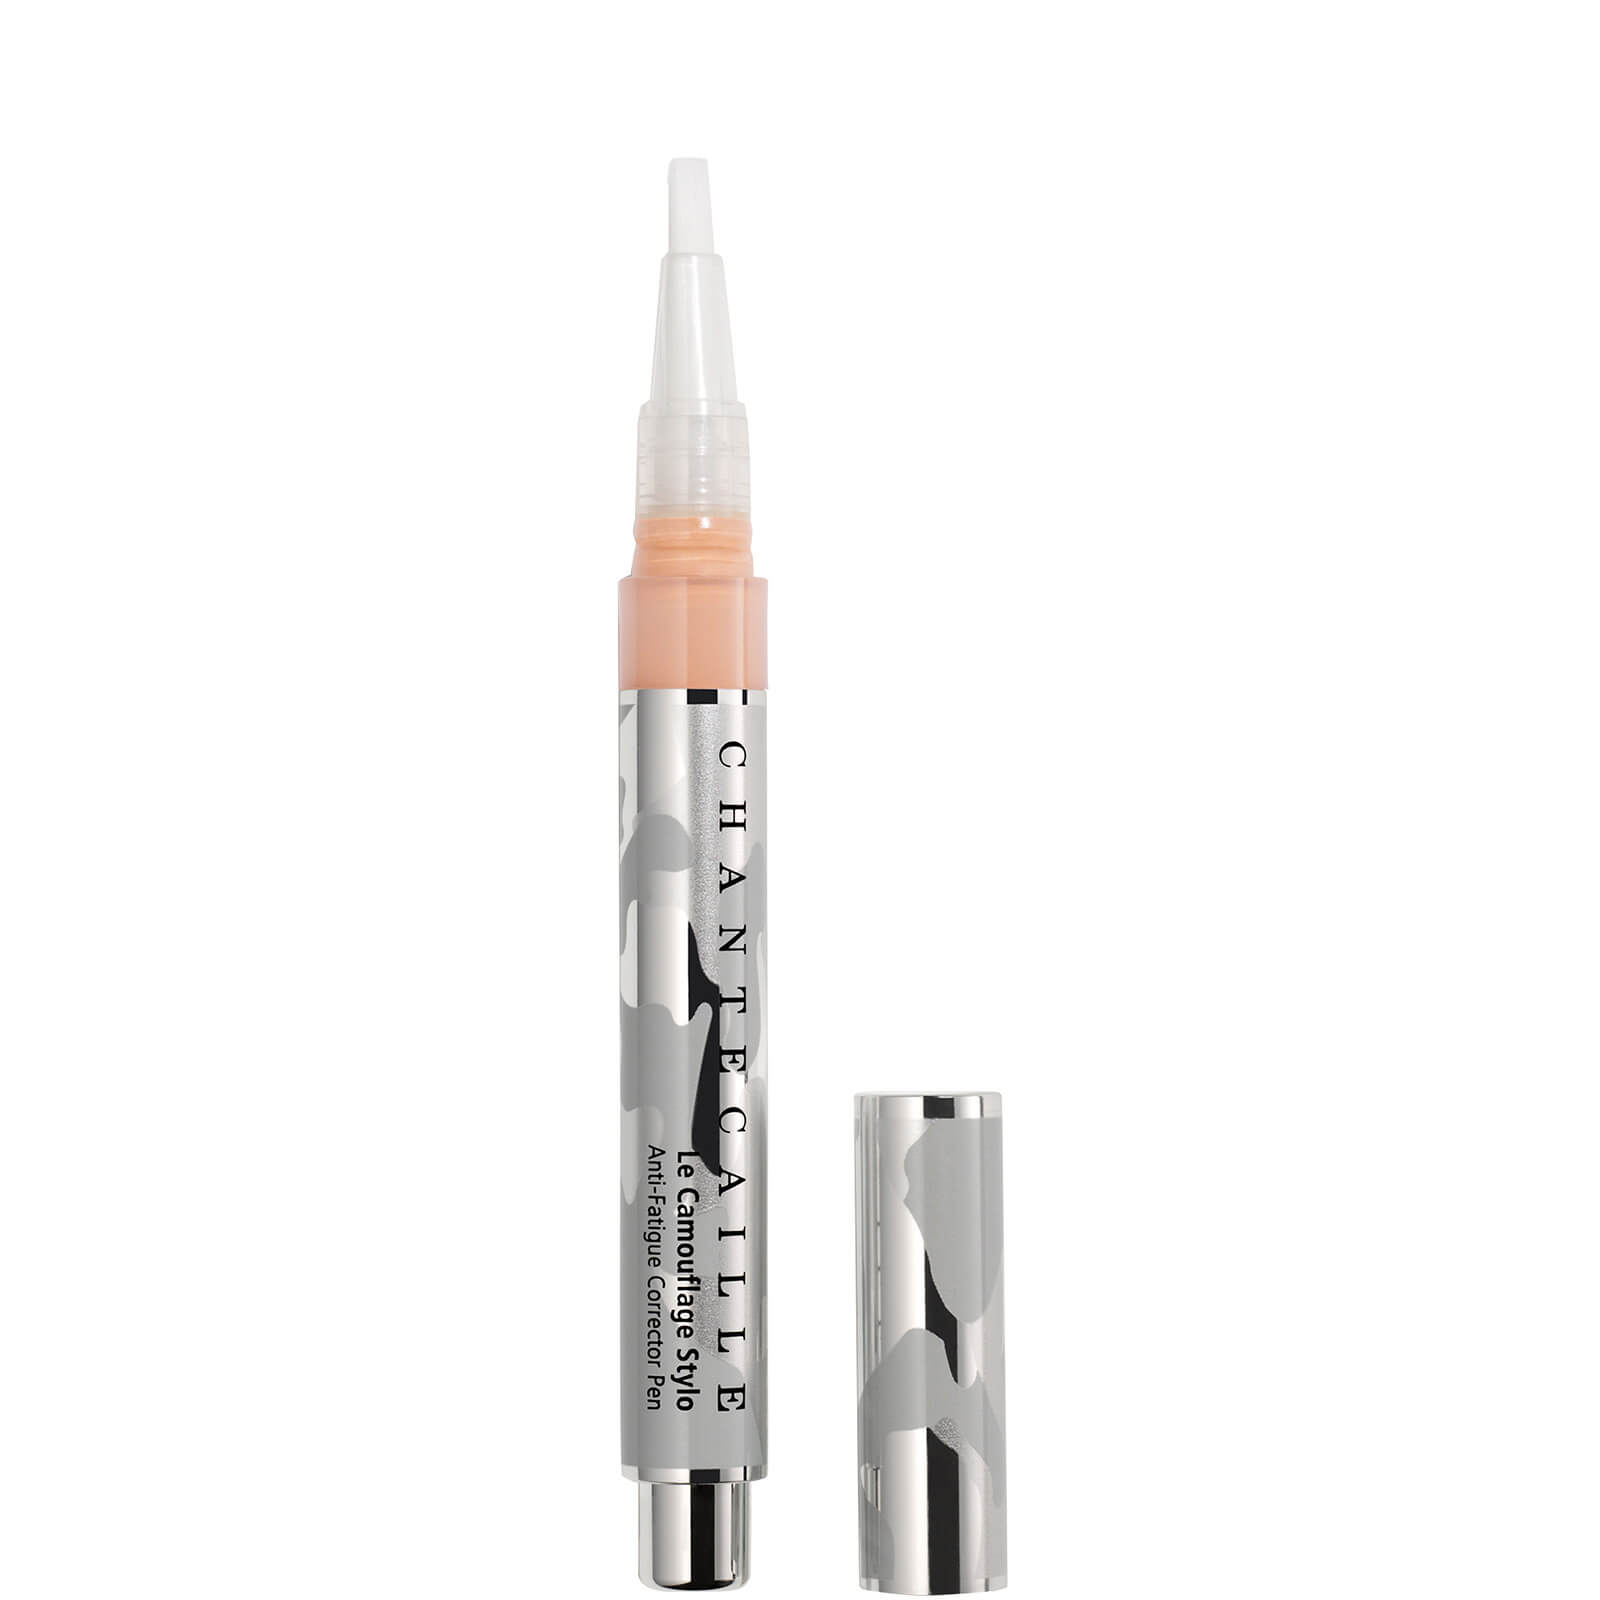 Chantecaille Le Camouflage Stylo Concealer - #3